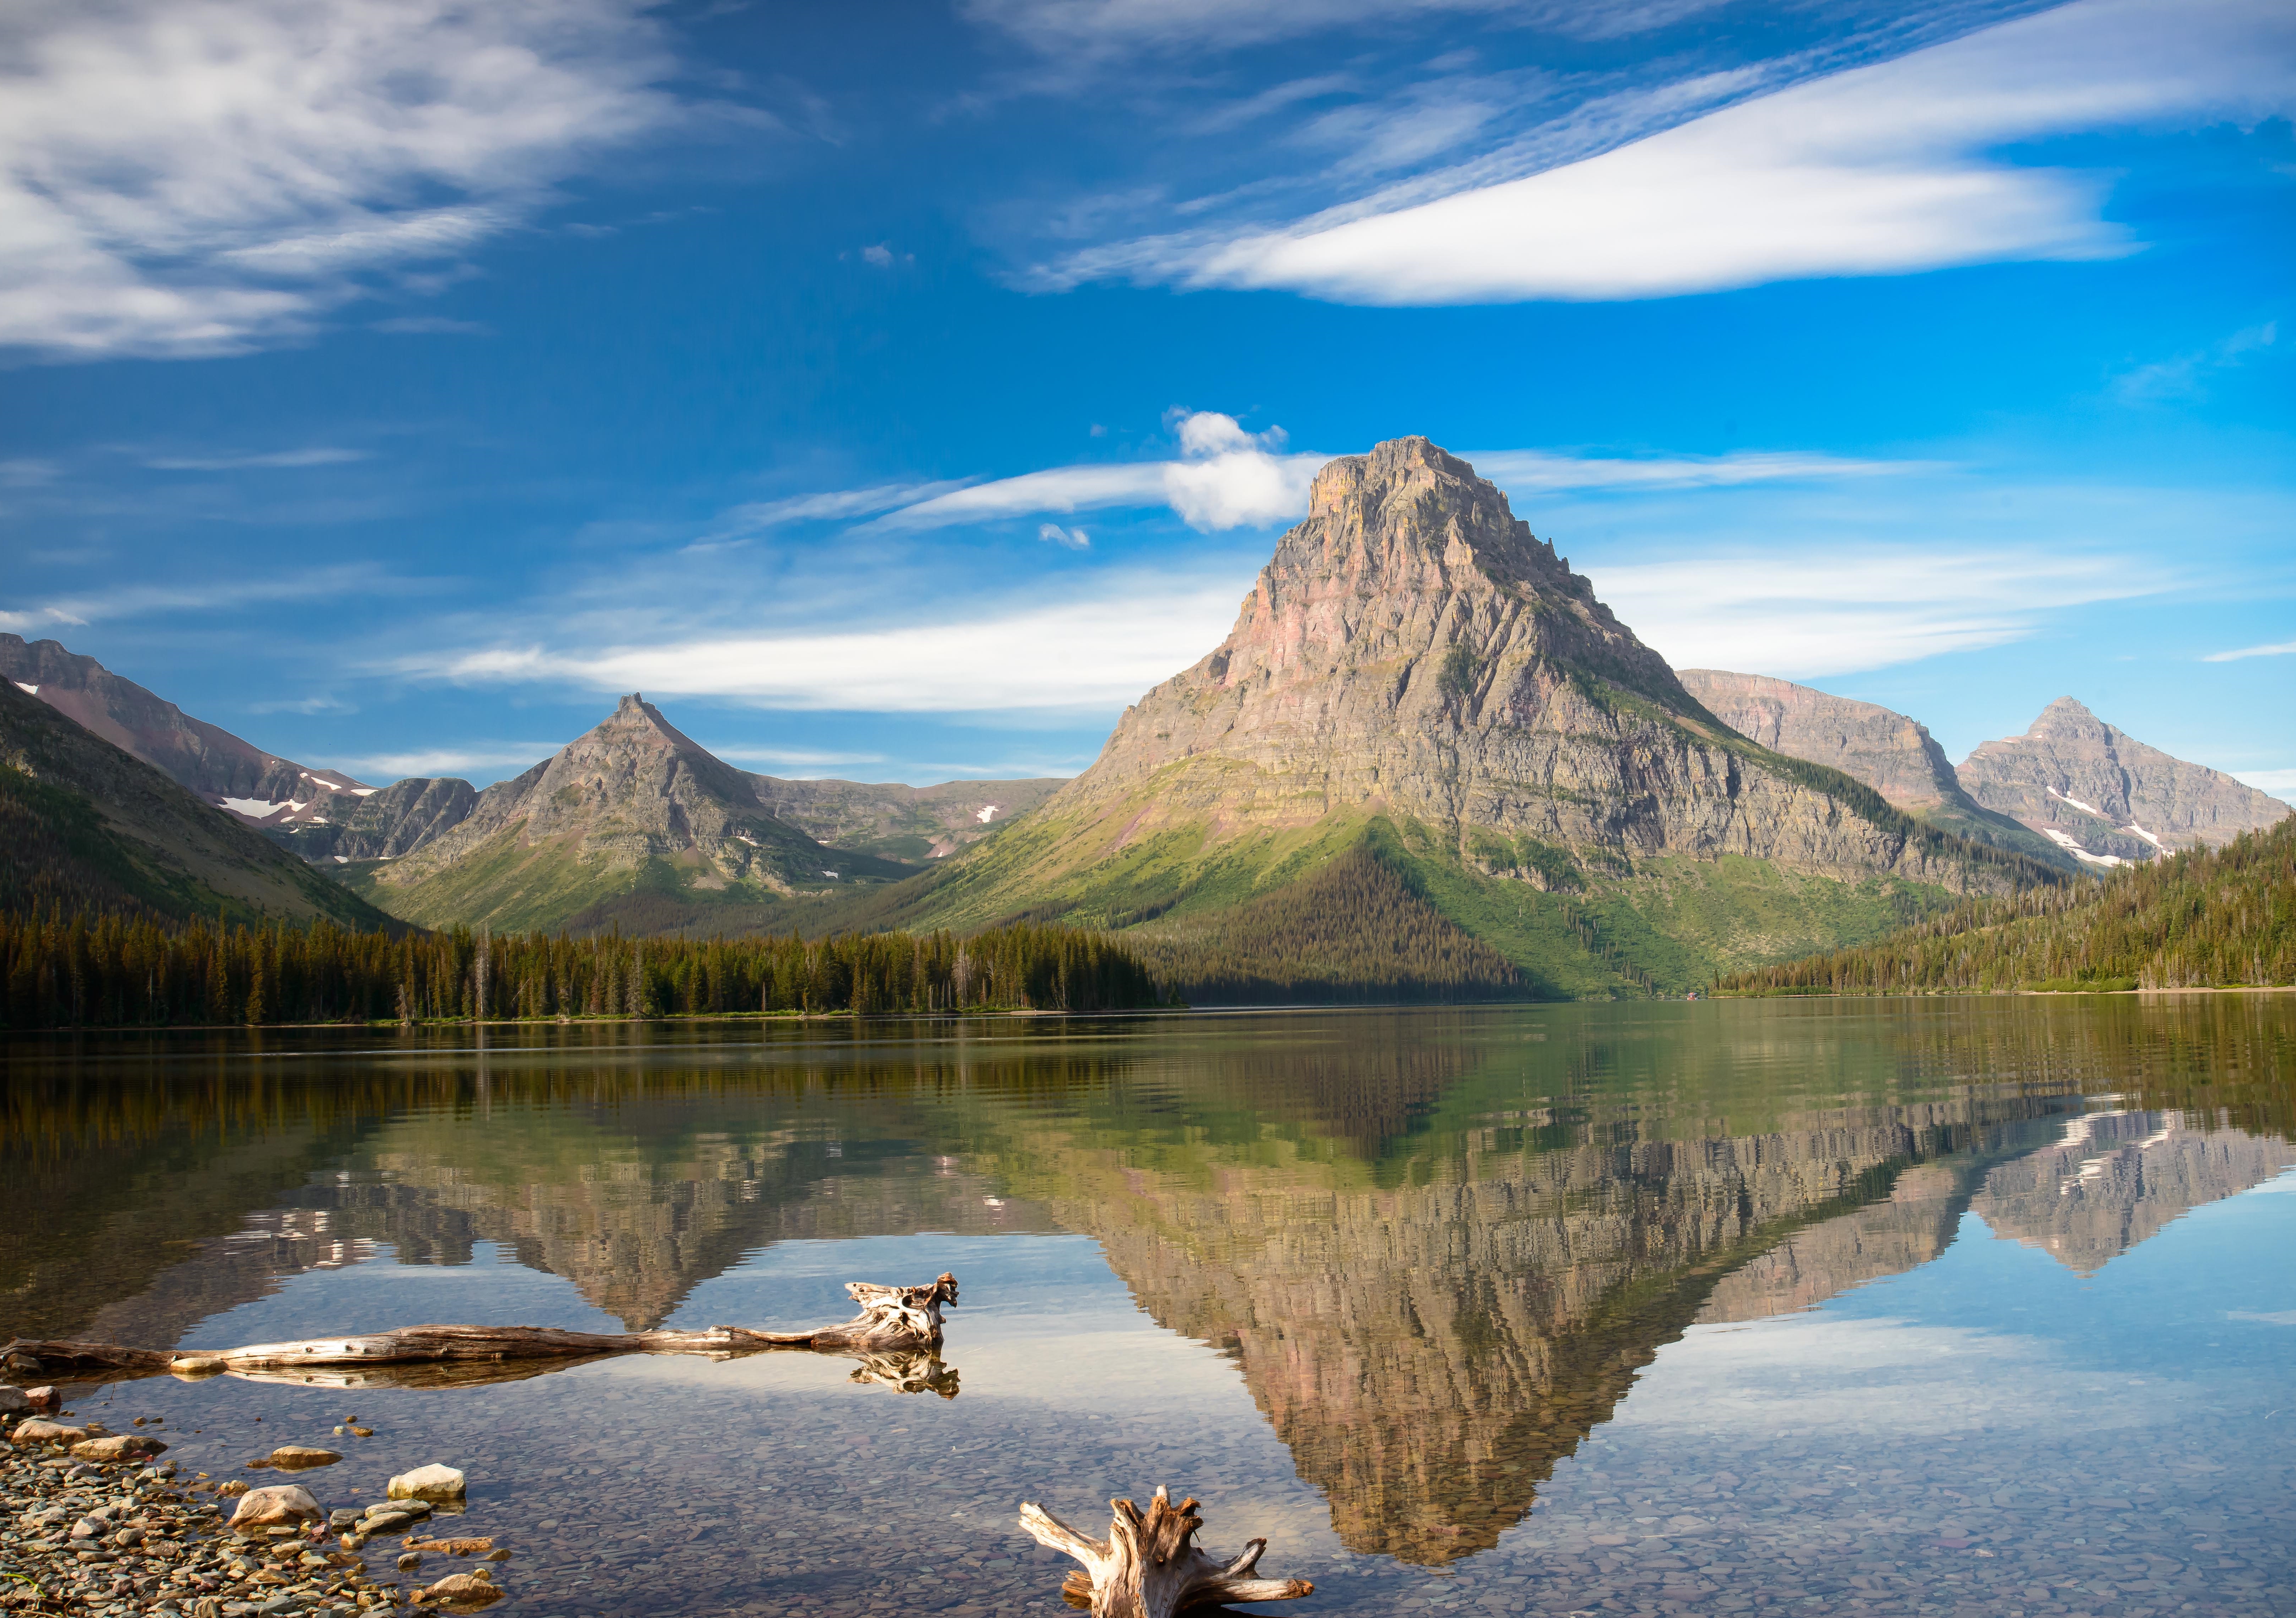 Mount Rockwell (Mount Sinopah) and Two Medicine Lake in Glacier National Monument, Montana. Photo taken on August 28, 2014.